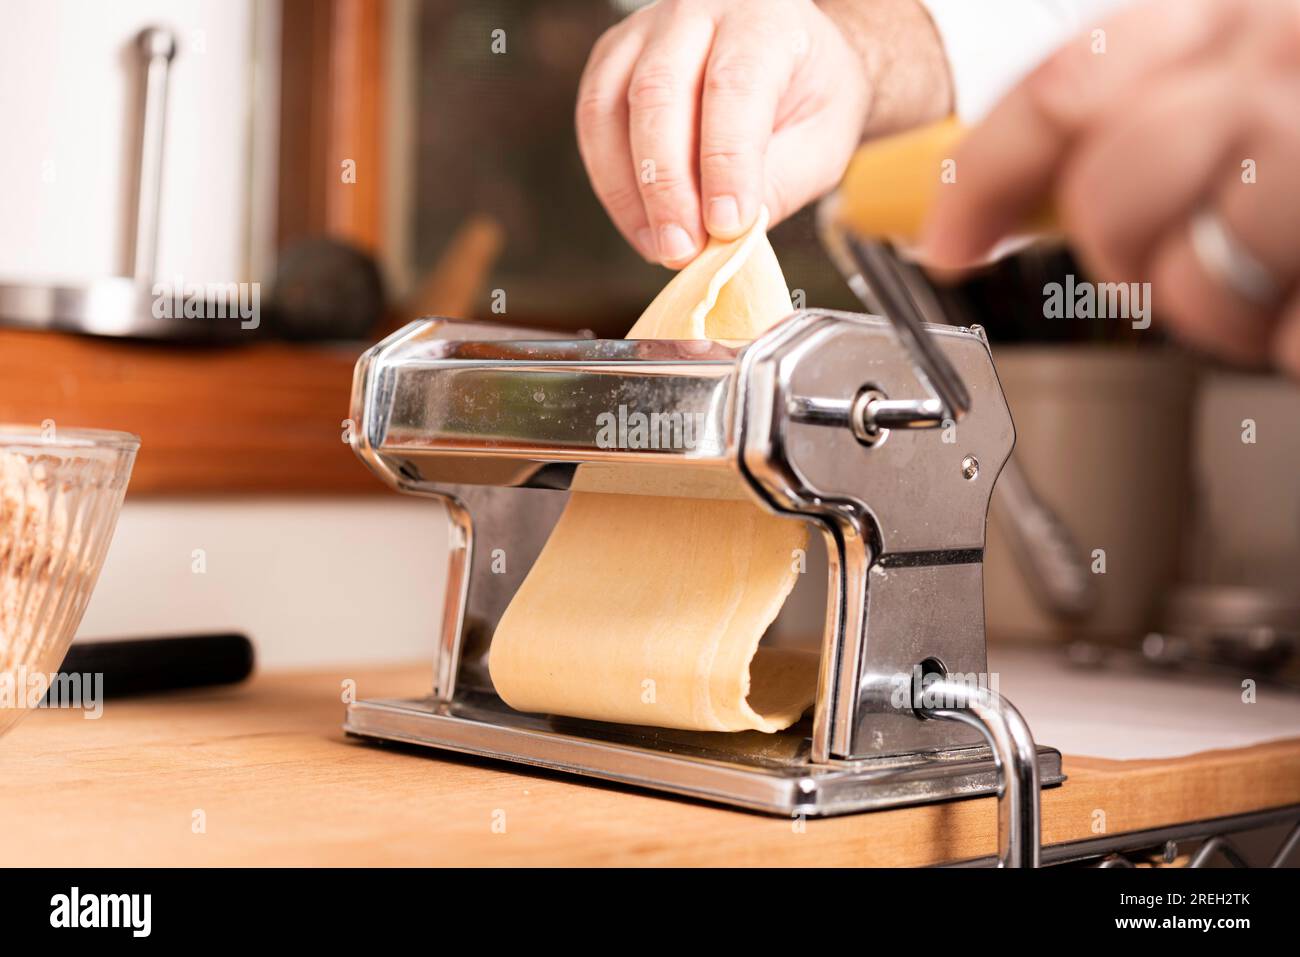 https://c8.alamy.com/comp/2REH2TK/making-pasta-and-tortellini-at-home-on-wooden-rack-and-chrome-pasta-maker-2REH2TK.jpg